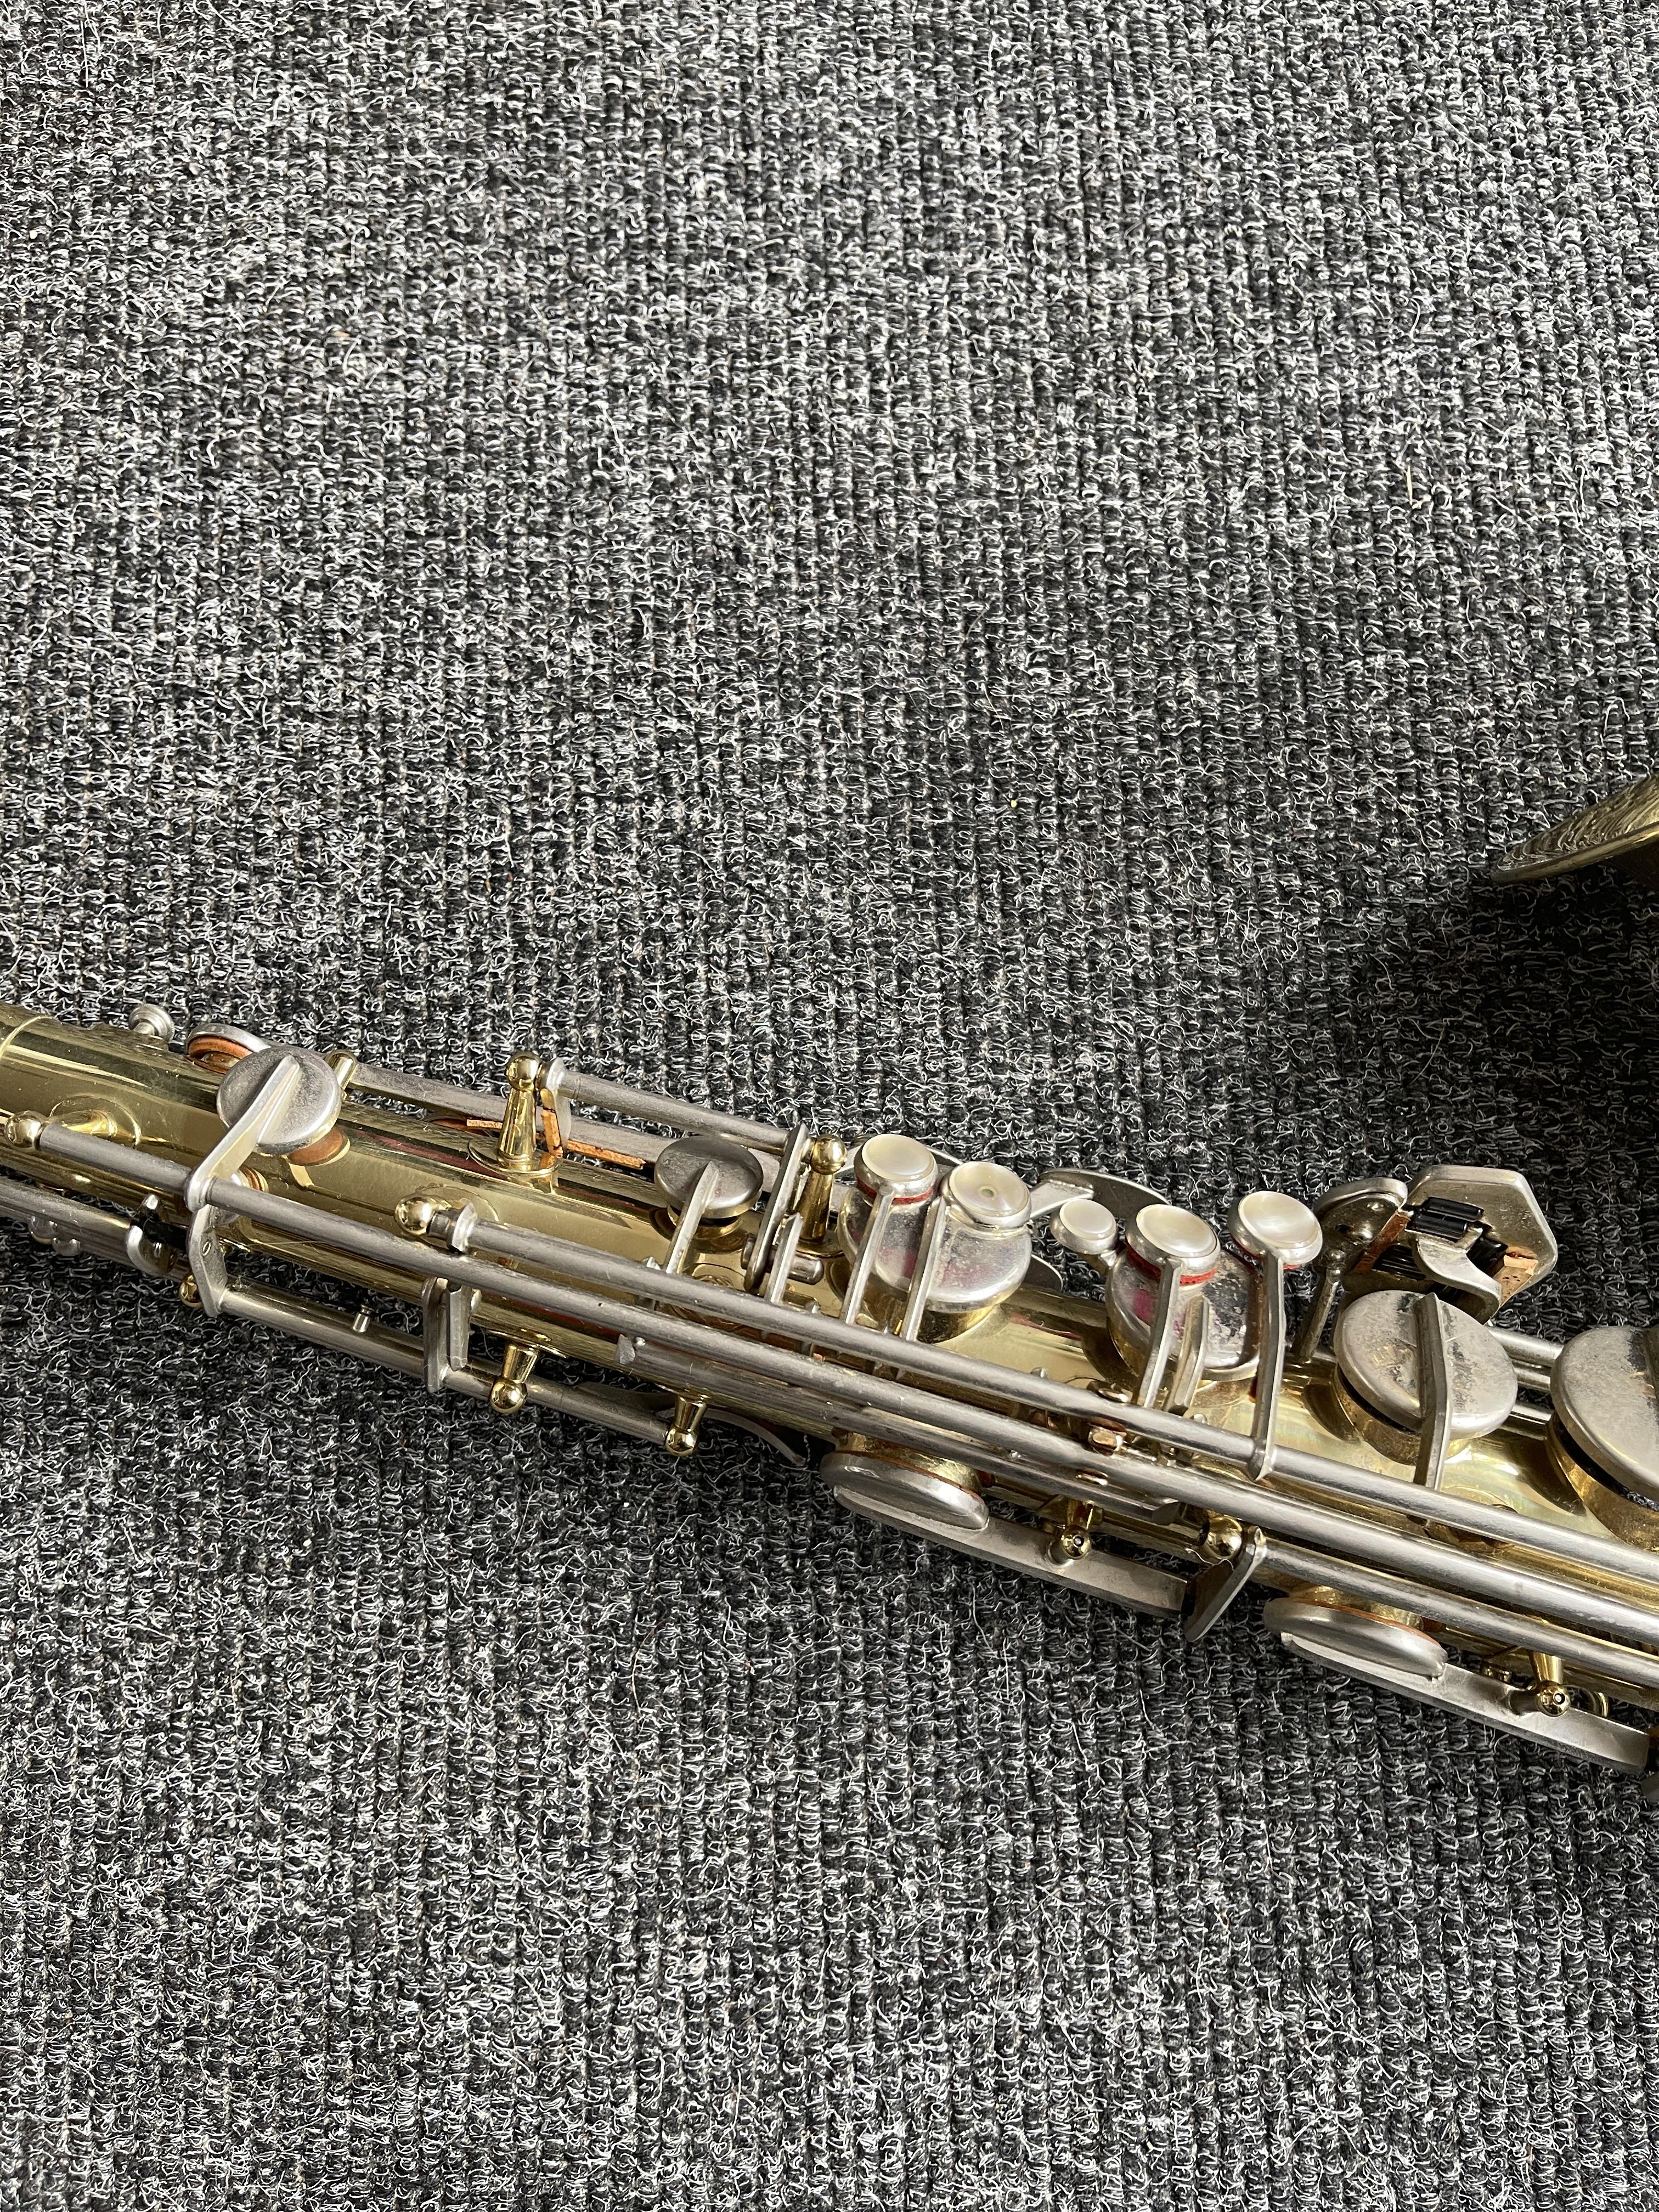 B&H 400 made for Boosey & Hawkes Cased Saxophone. - Image 5 of 31